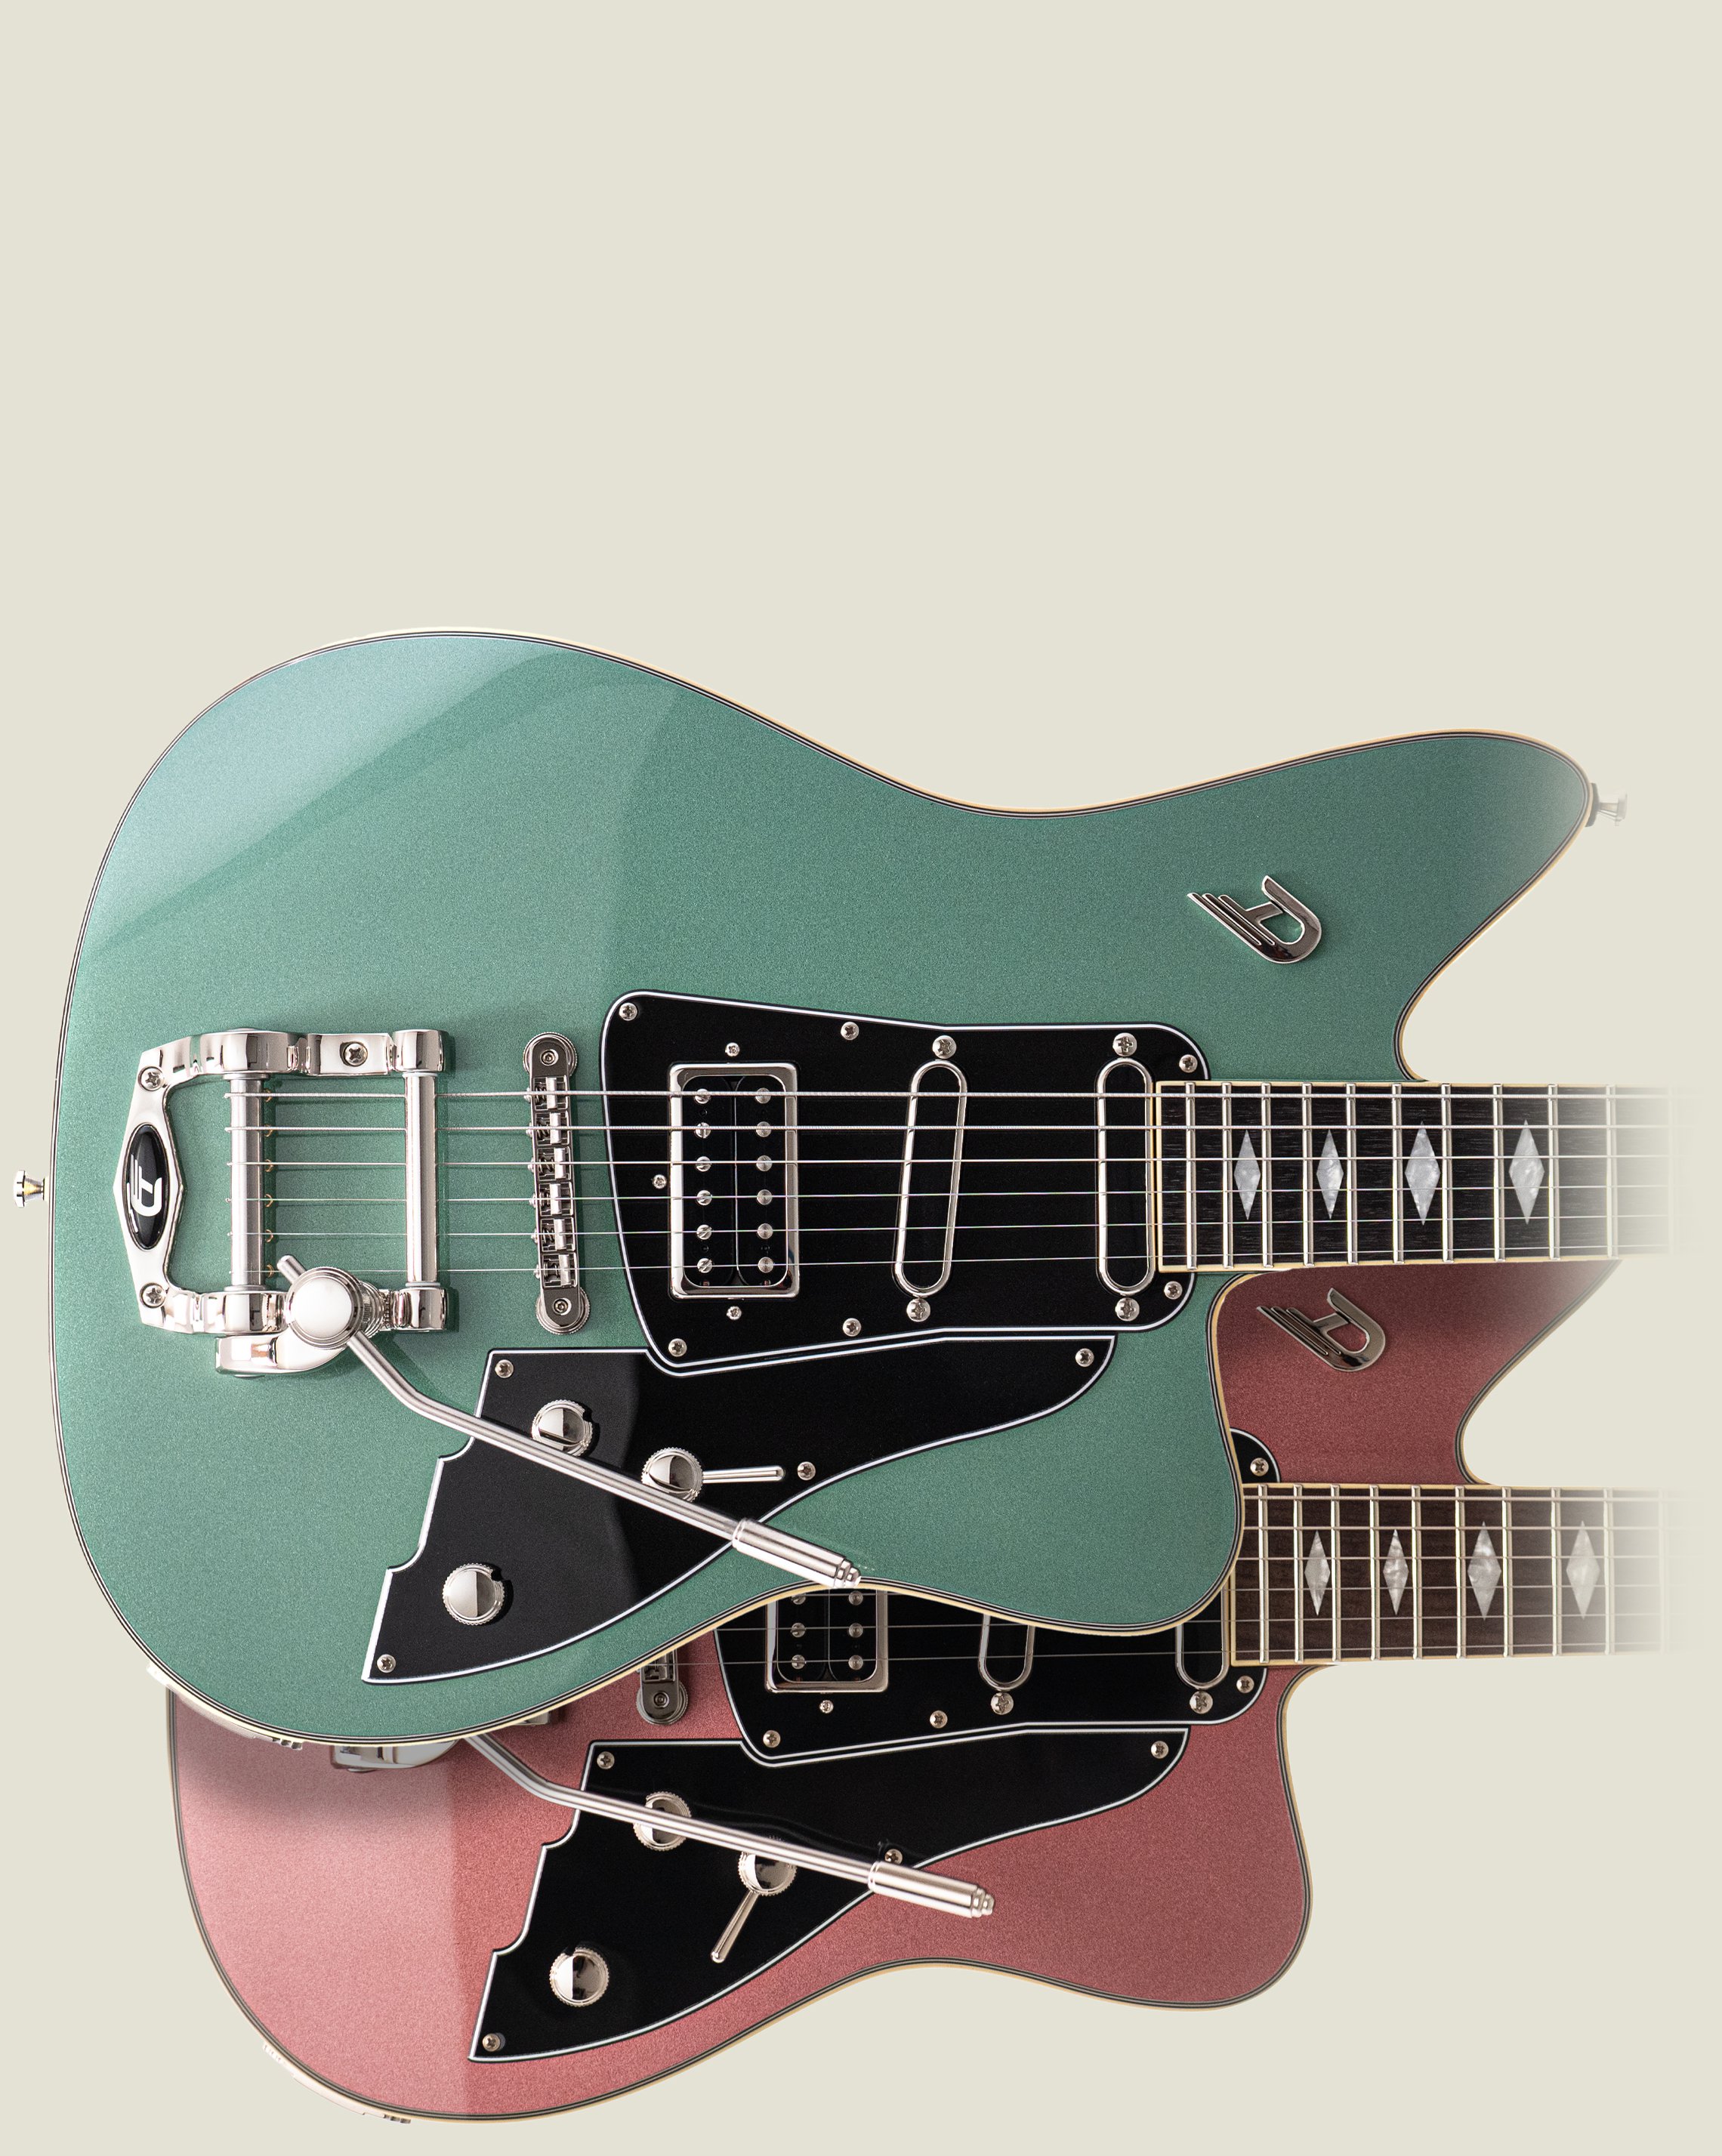 Image of the Duesenberg Paloma Series in Catalina Harbor Green and Catalina Sunset Rose on a light background